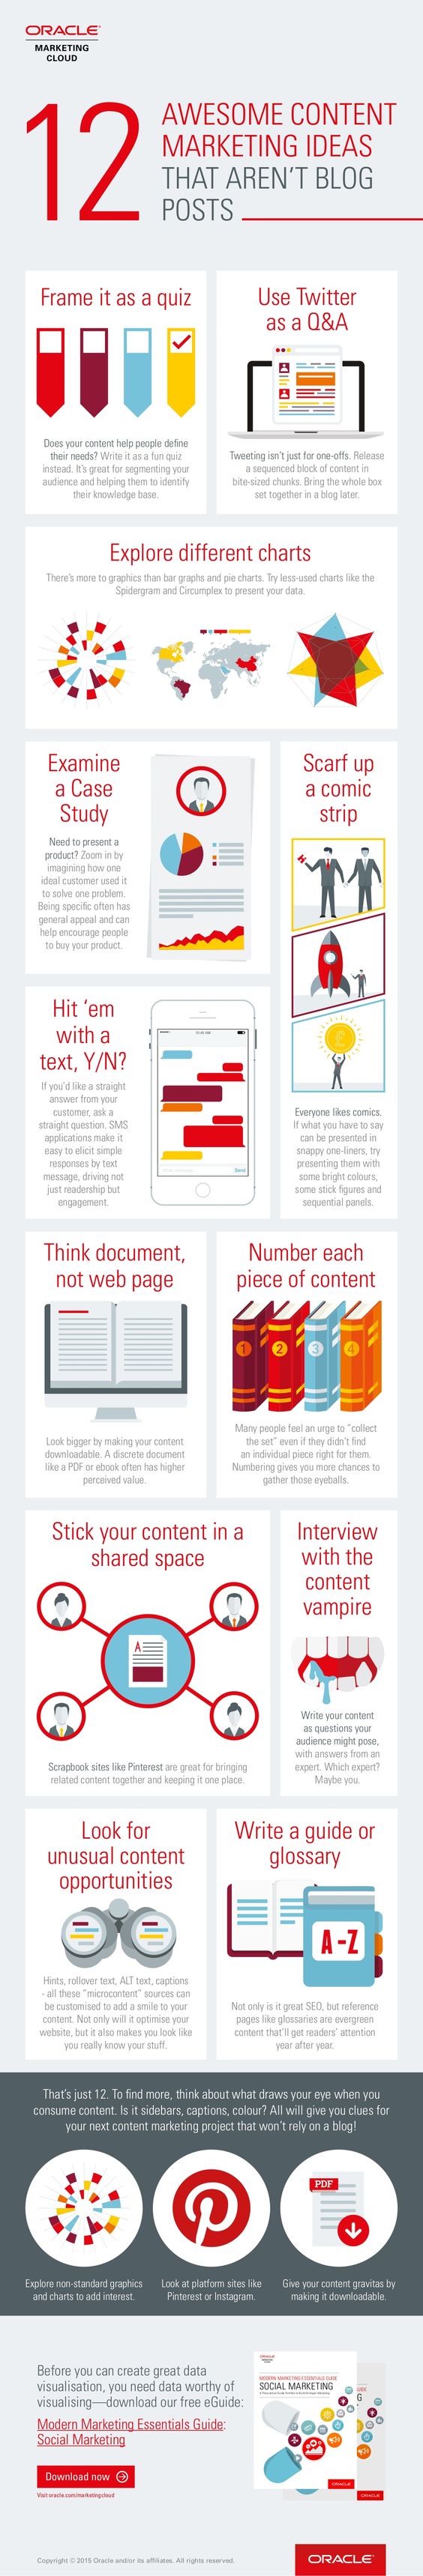 12 Great Content Marketing  Aren't Blog Posts - #infographic